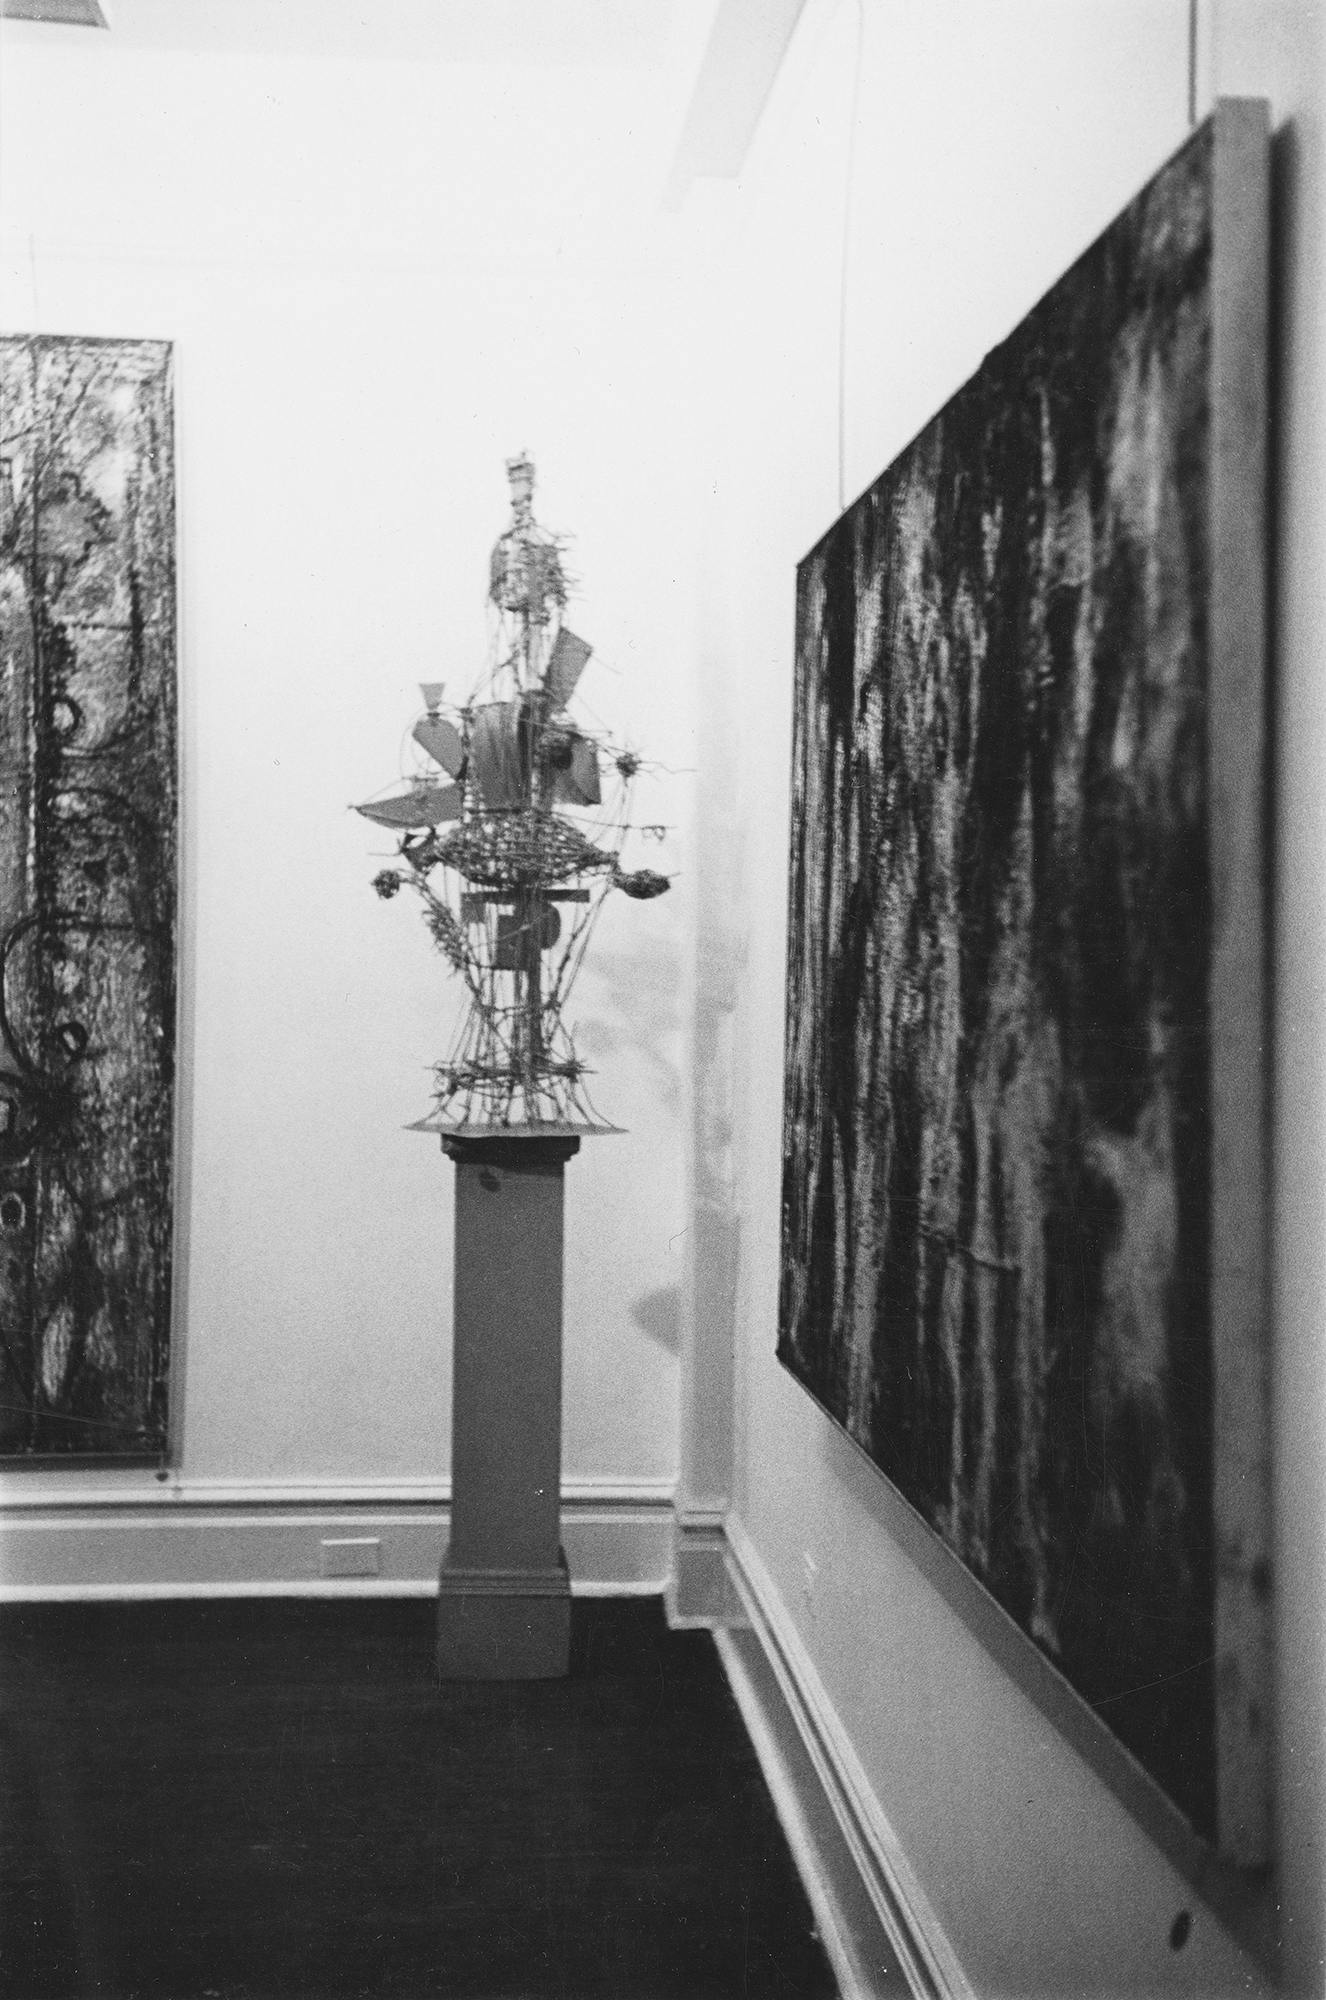 Installation view, Exhibition of Works so far Completed on Guggenheim Fellowship, Betty Parsons Gallery, New York, 1951. – The Richard Pousette-Dart Foundation